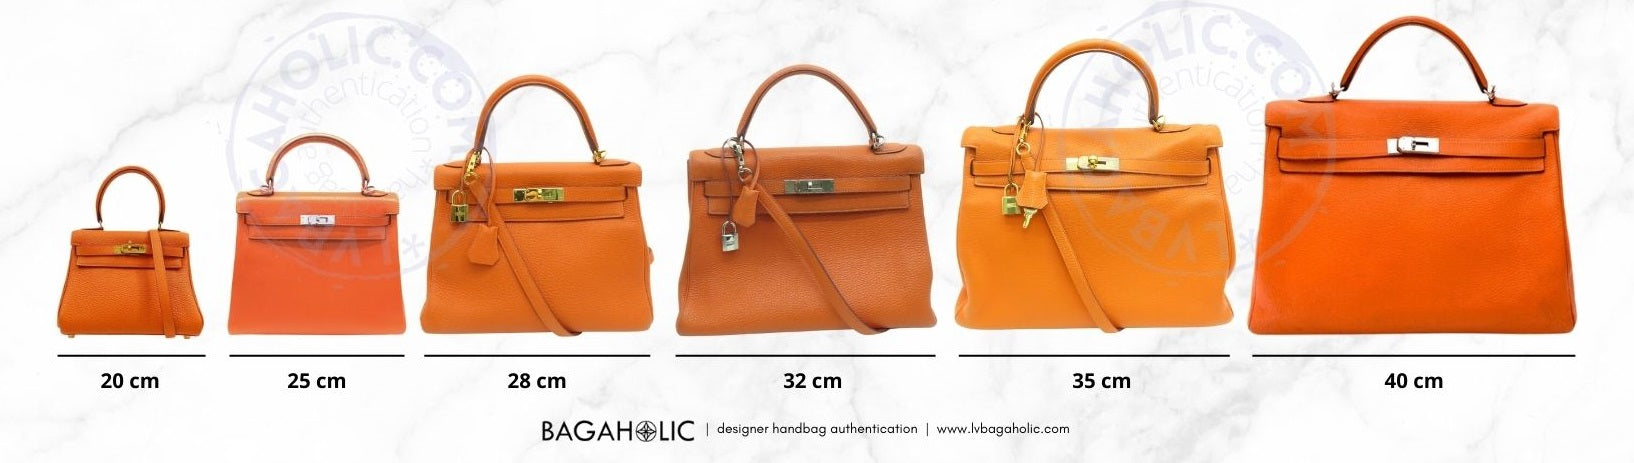 Everything About The Hermes Kelly Bag: Sizes, Prices, History